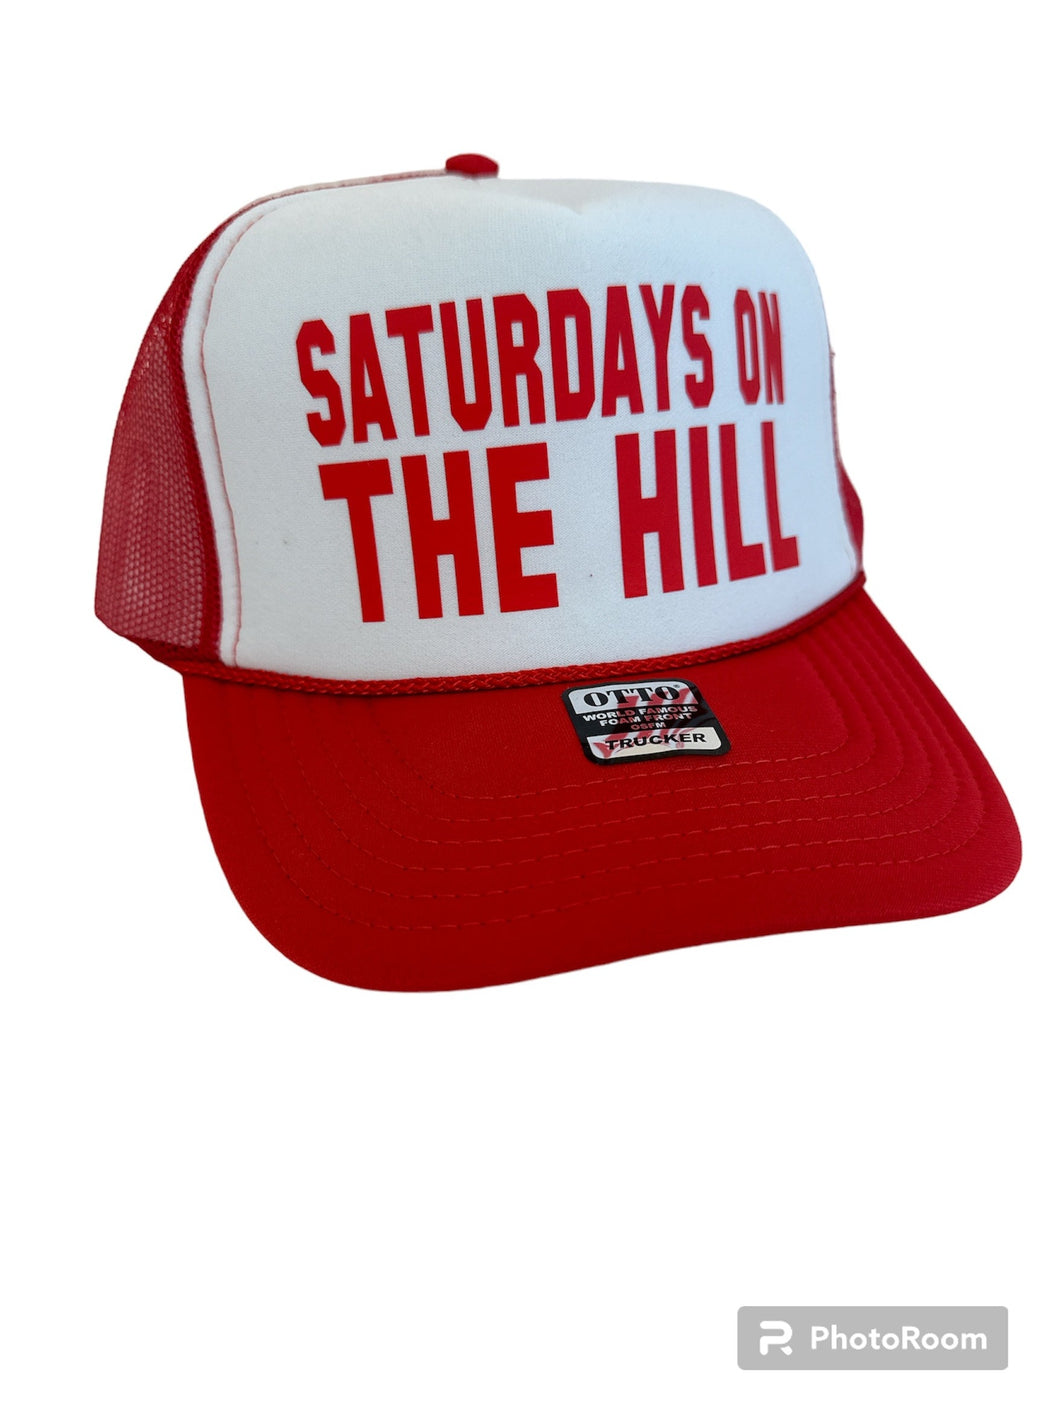 Saturdays on the Hill Trucker in Red